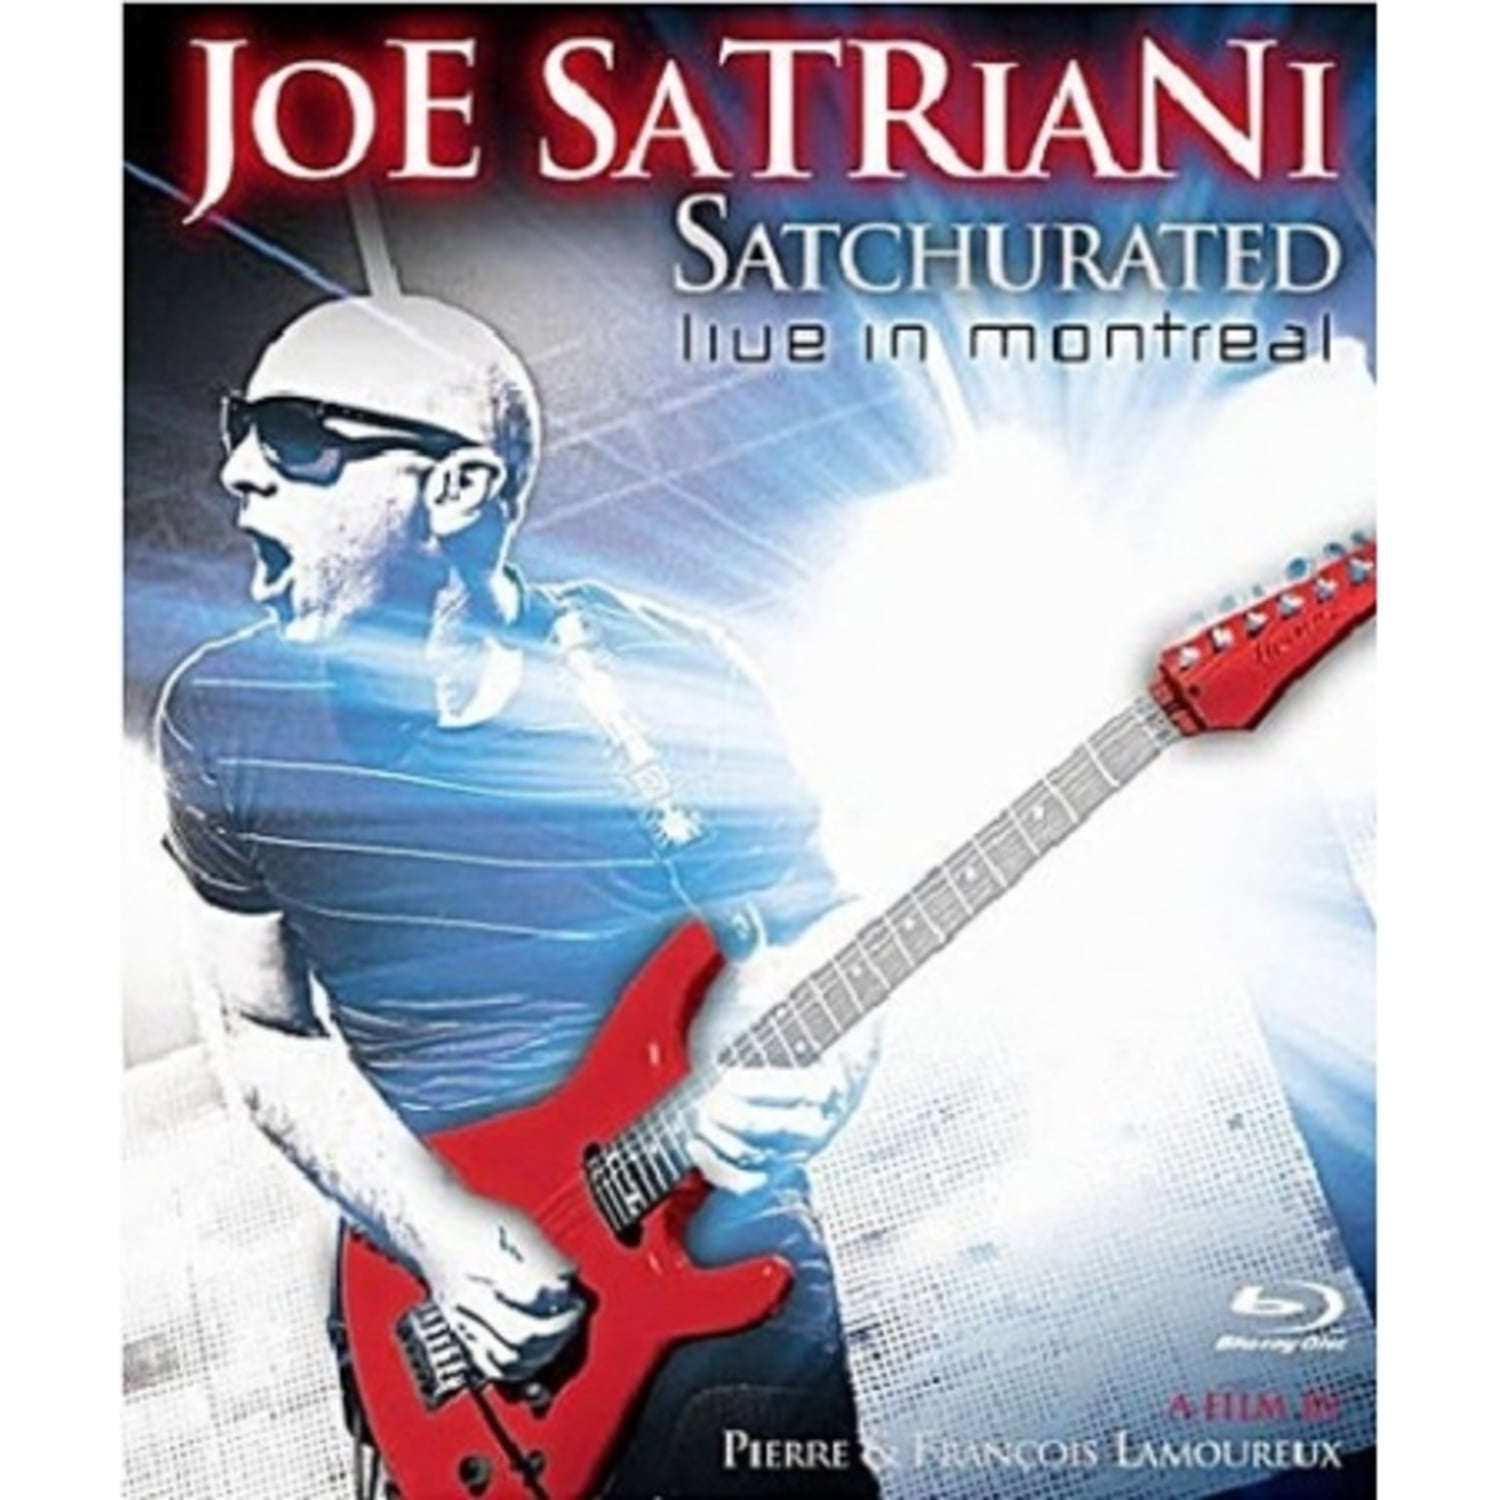 JOE SATRIANI - SATCHURATED : LIVE IN MONTREAL (1 DISC)